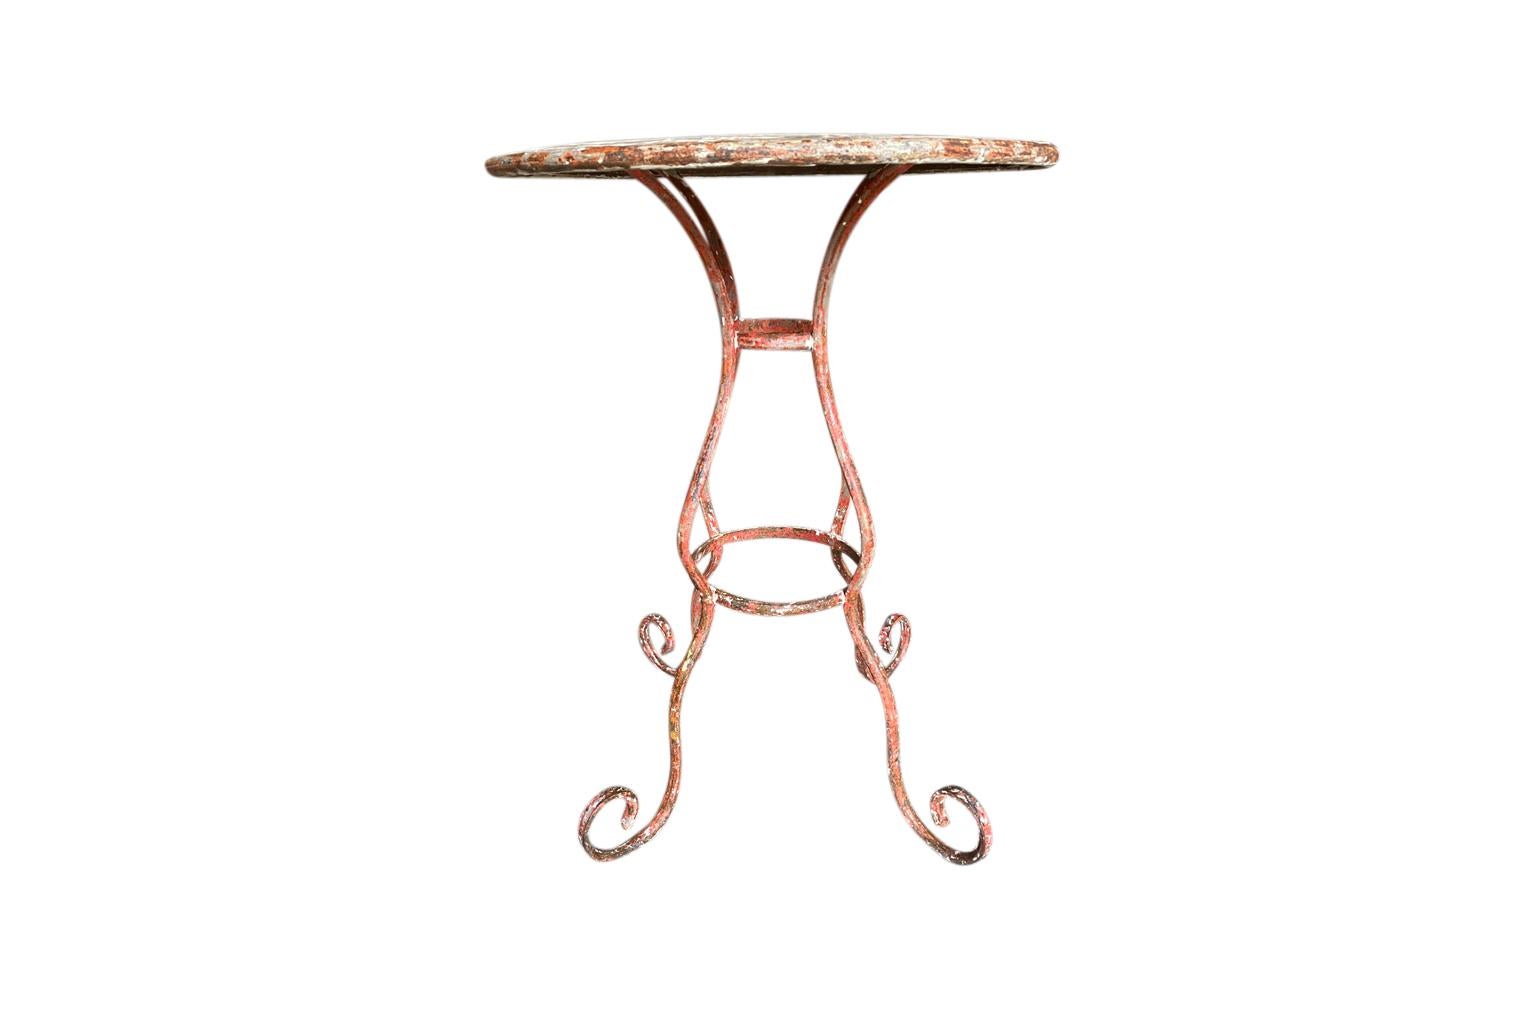 A very charming later 19th century Bistro Table - Gueridon from the South of France. Beautifully crafted in metal with a painted and scraped finish. Terrific patina. Perfect for any interior or garden.